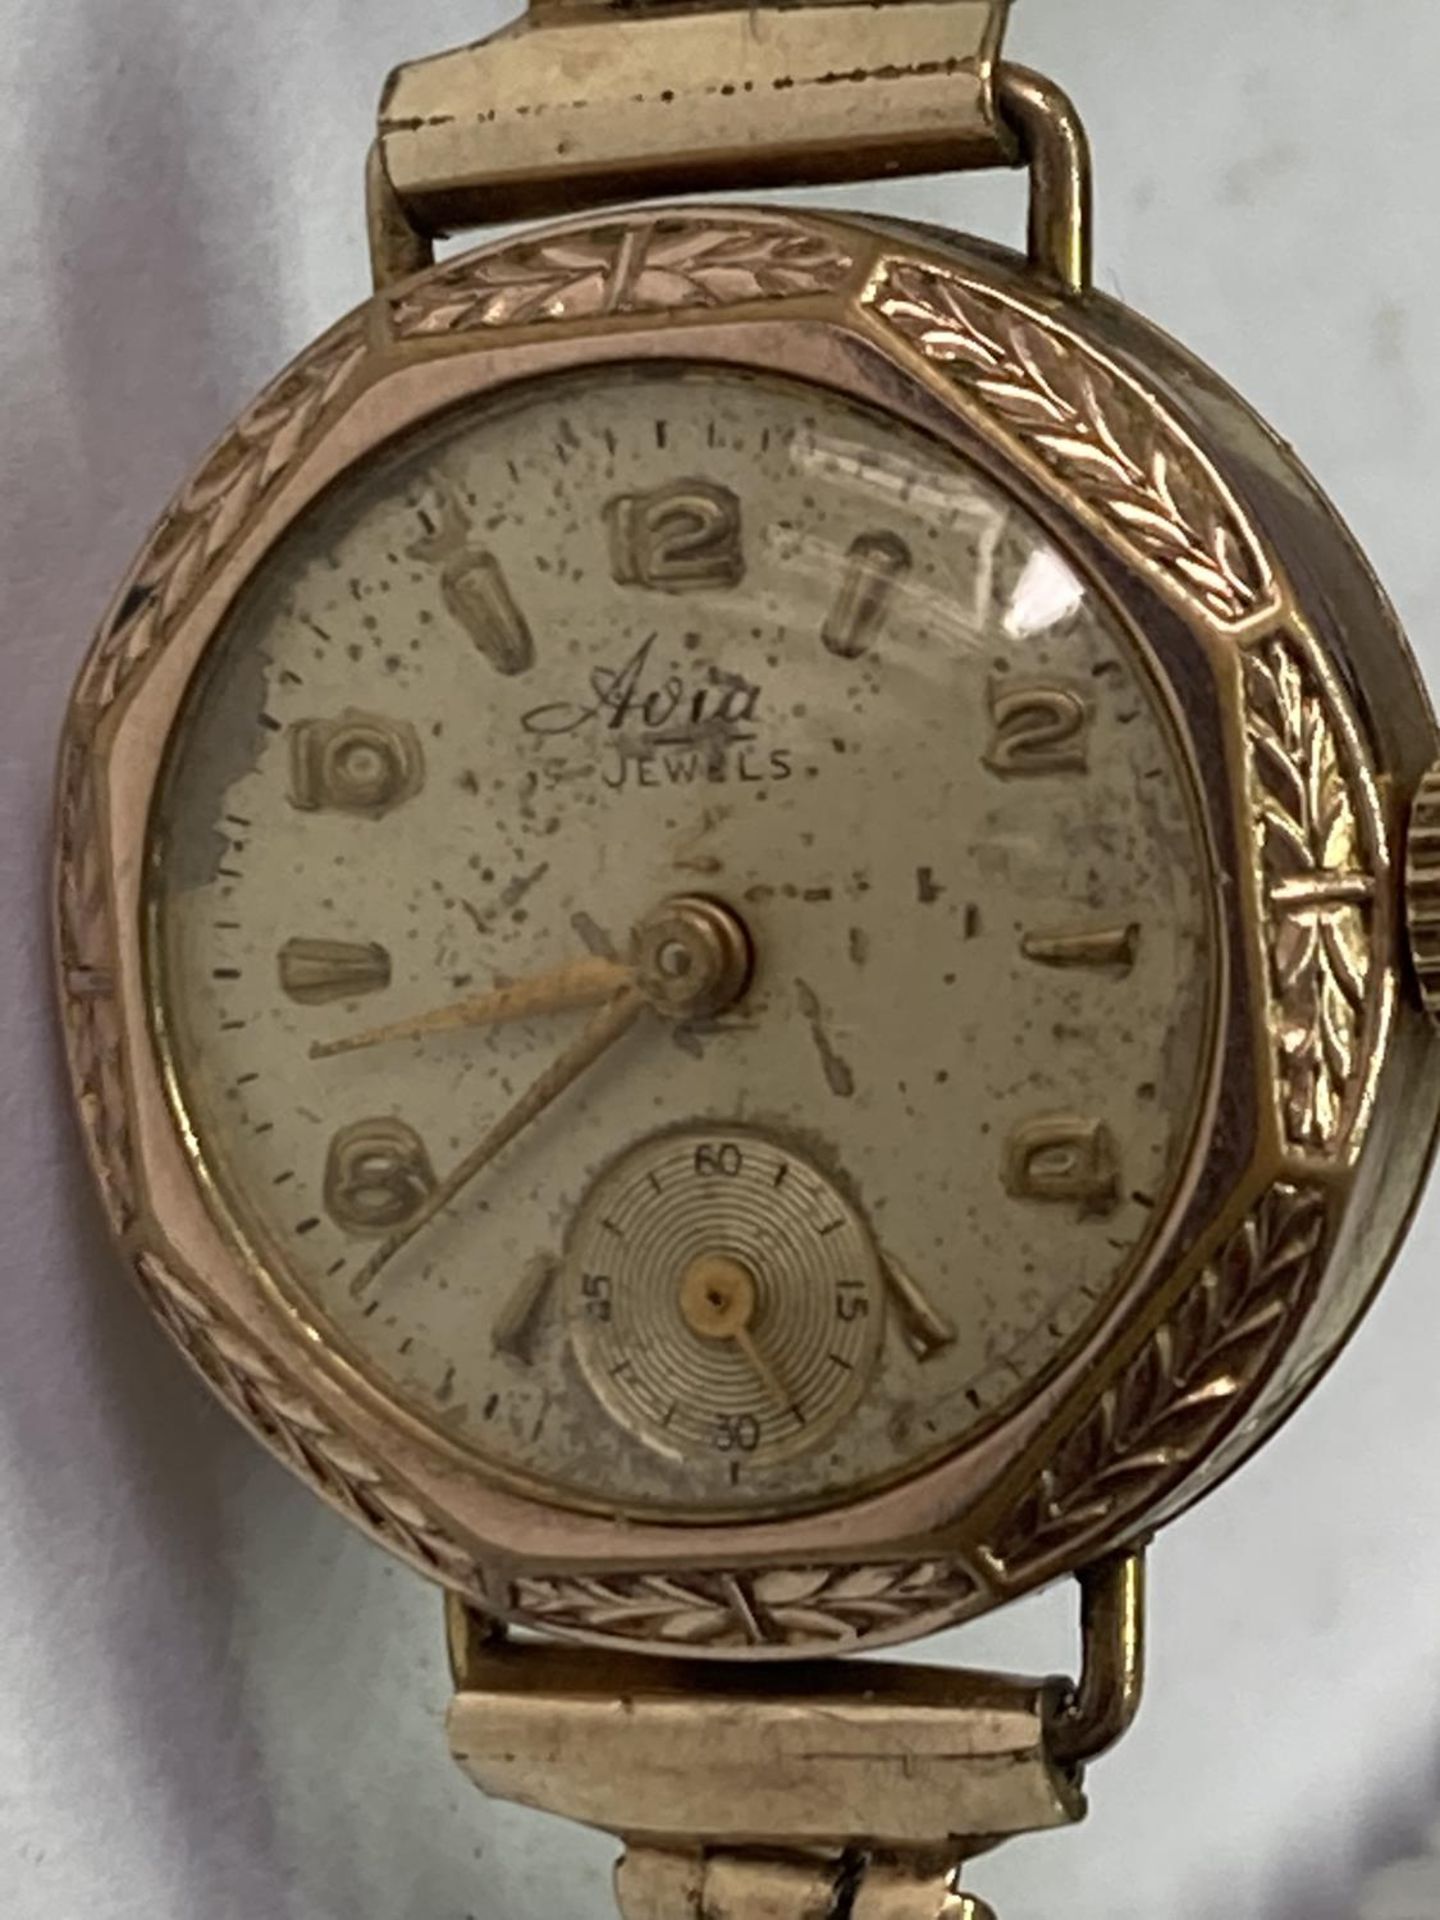 A VINTAGE AVIA GOLD PLATED WRIST WATCH - Image 3 of 3